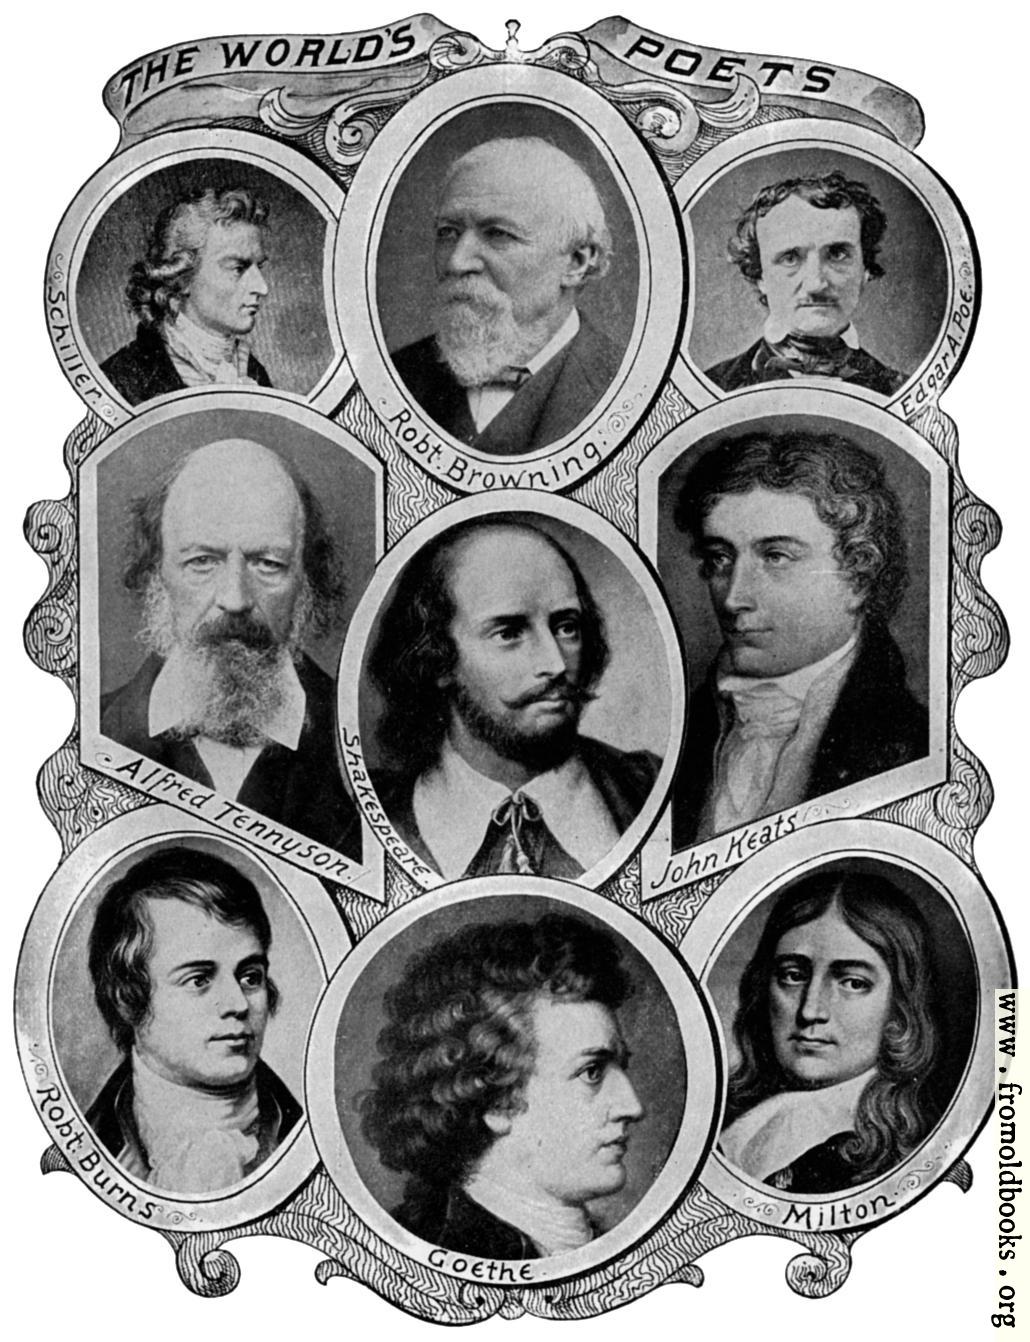 [Picture: The World’s Poets]